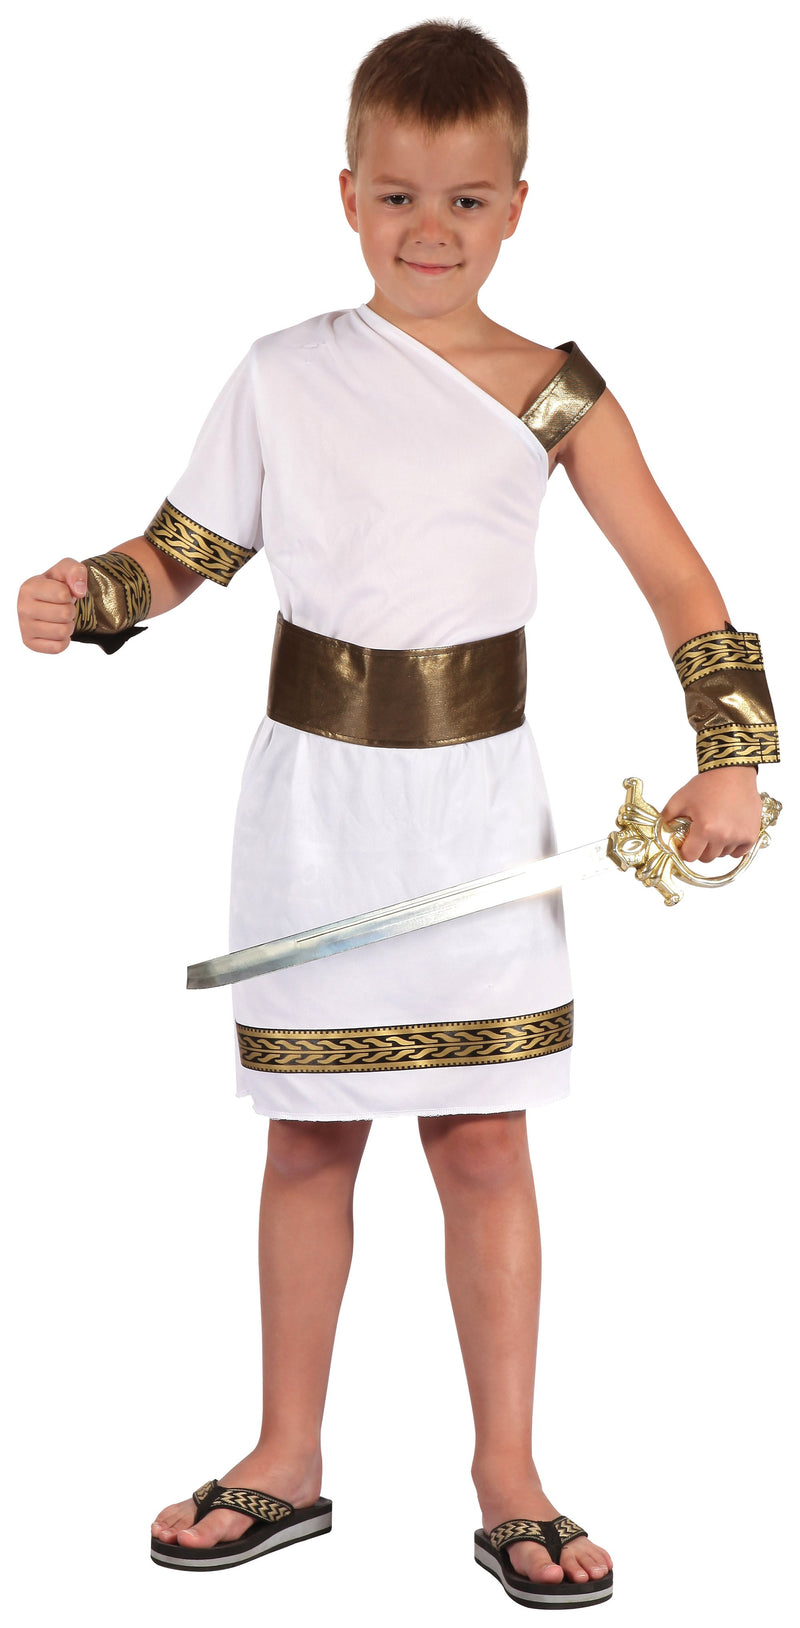 Gladiator S Childrens Costumes Male To Fit Child Of Height 110cm 122cm Boys Bristol Novelty Childrens Costumes 2214